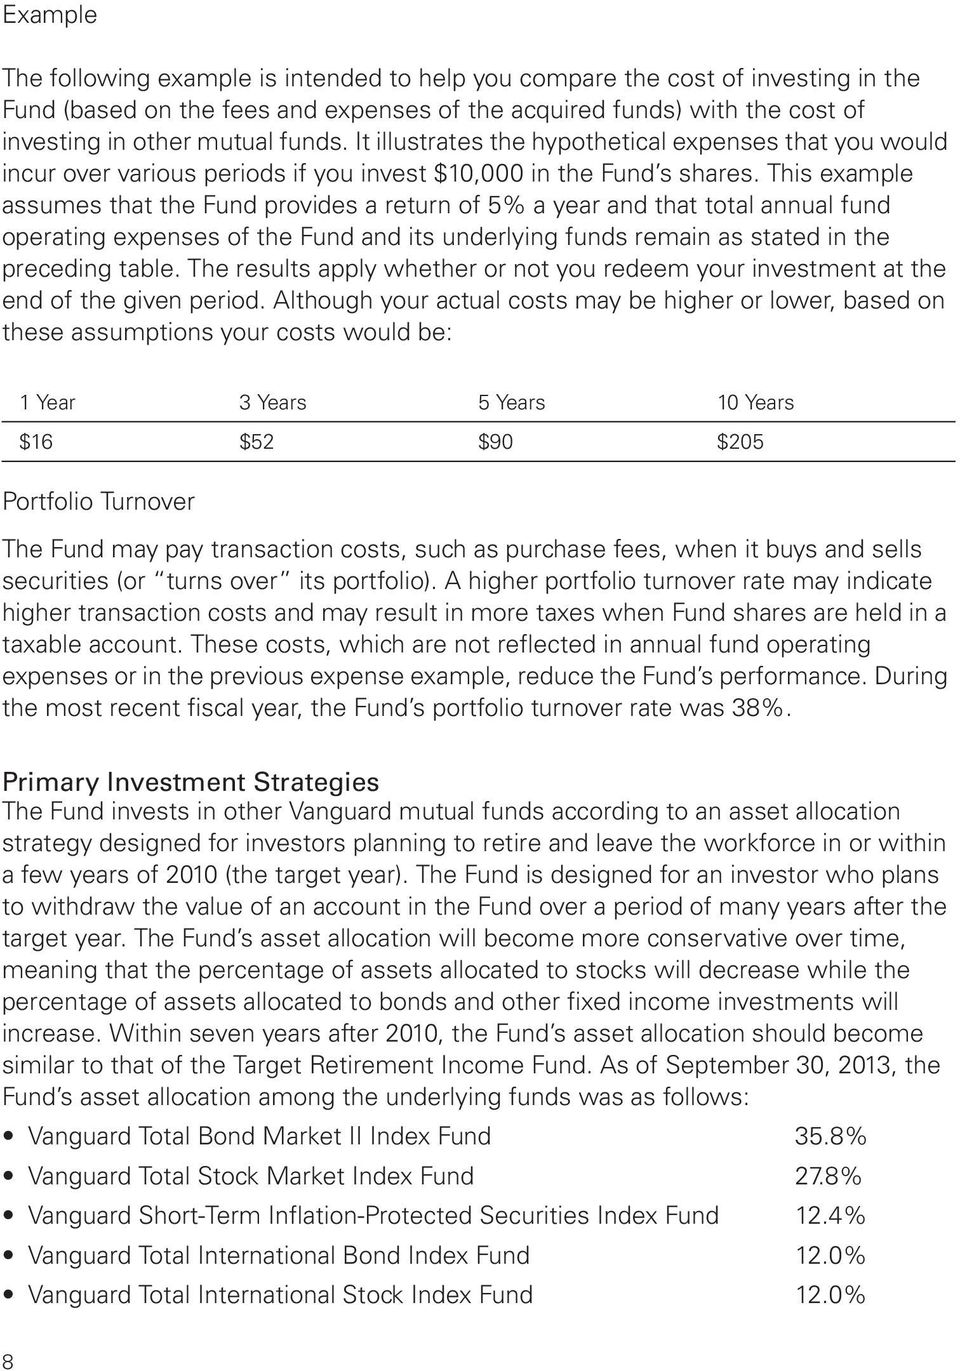 This example assumes that the Fund provides a return of 5% a year and that total annual fund operating expenses of the Fund and its underlying funds remain as stated in the preceding table.